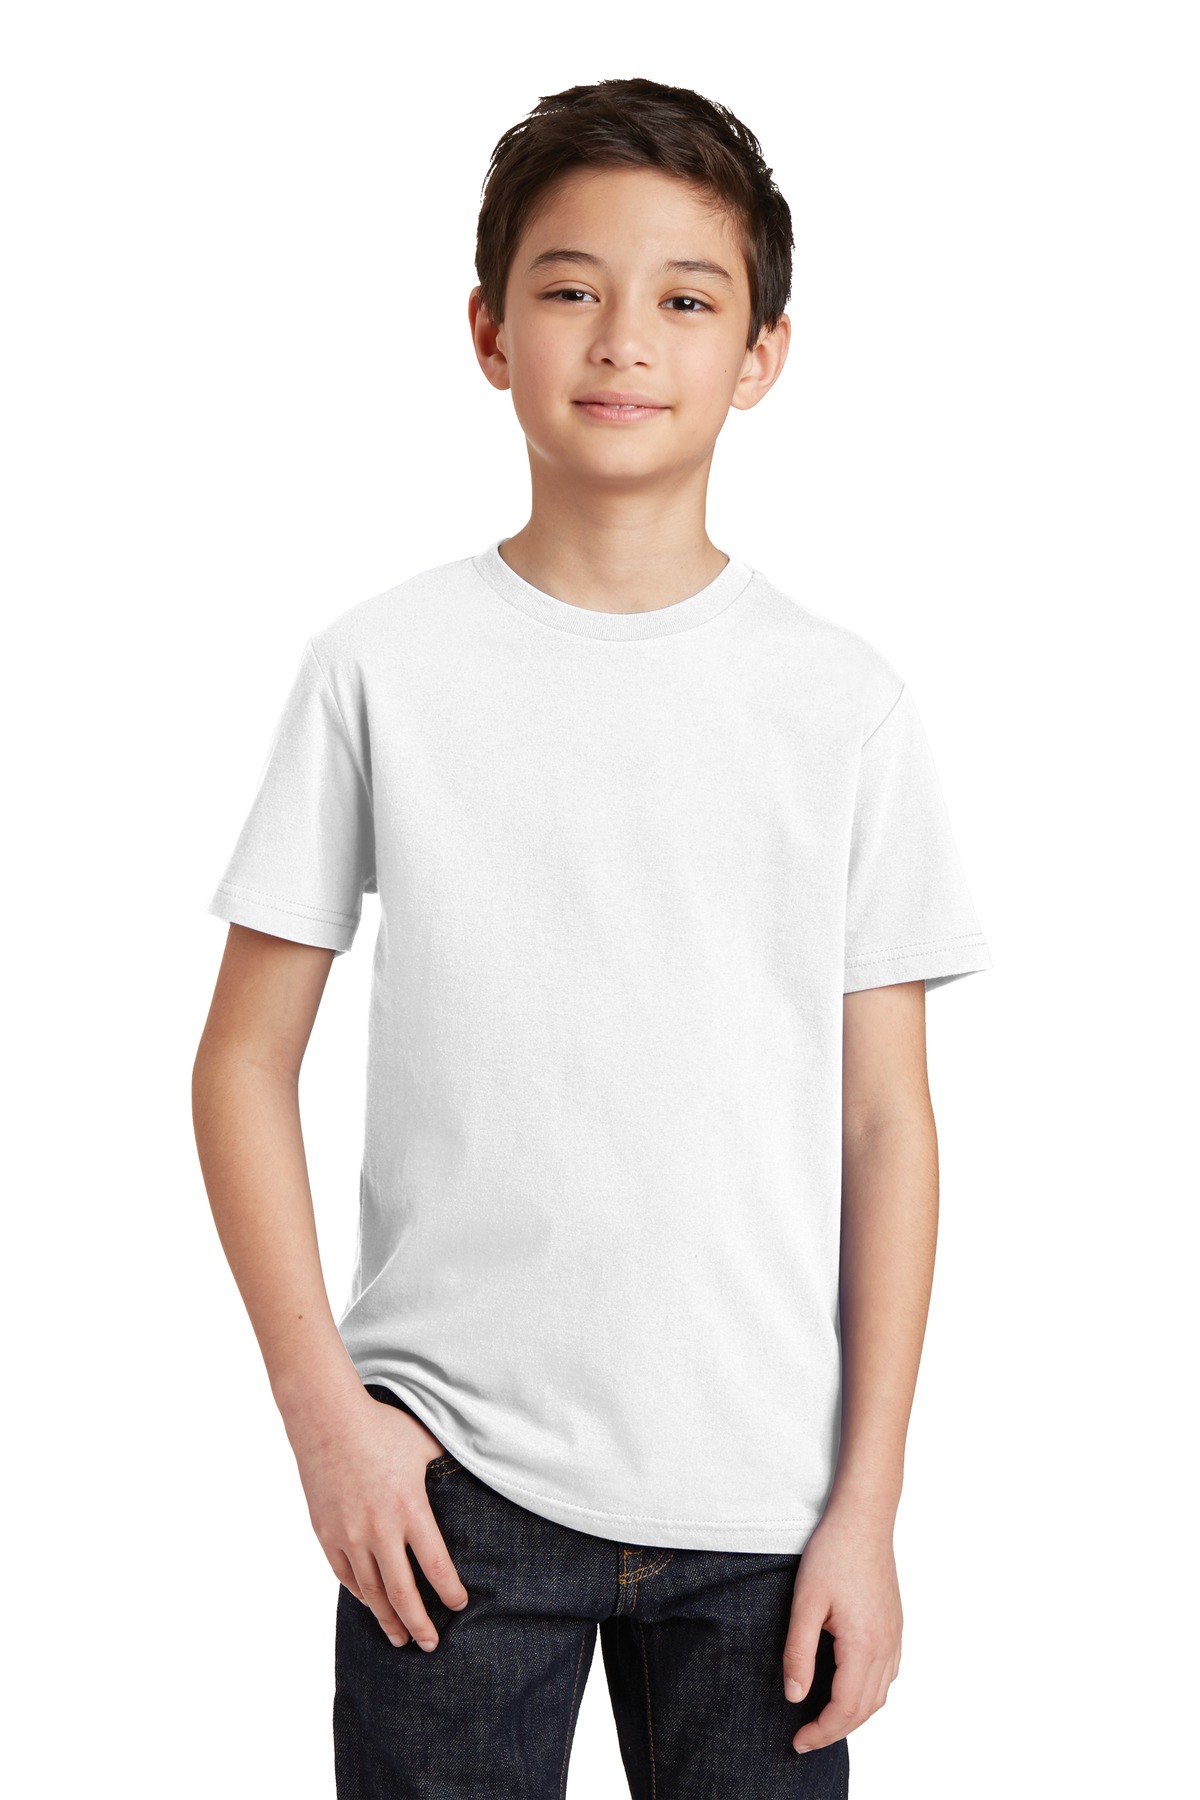 District  DT5000Y - Youth The Concert Tee